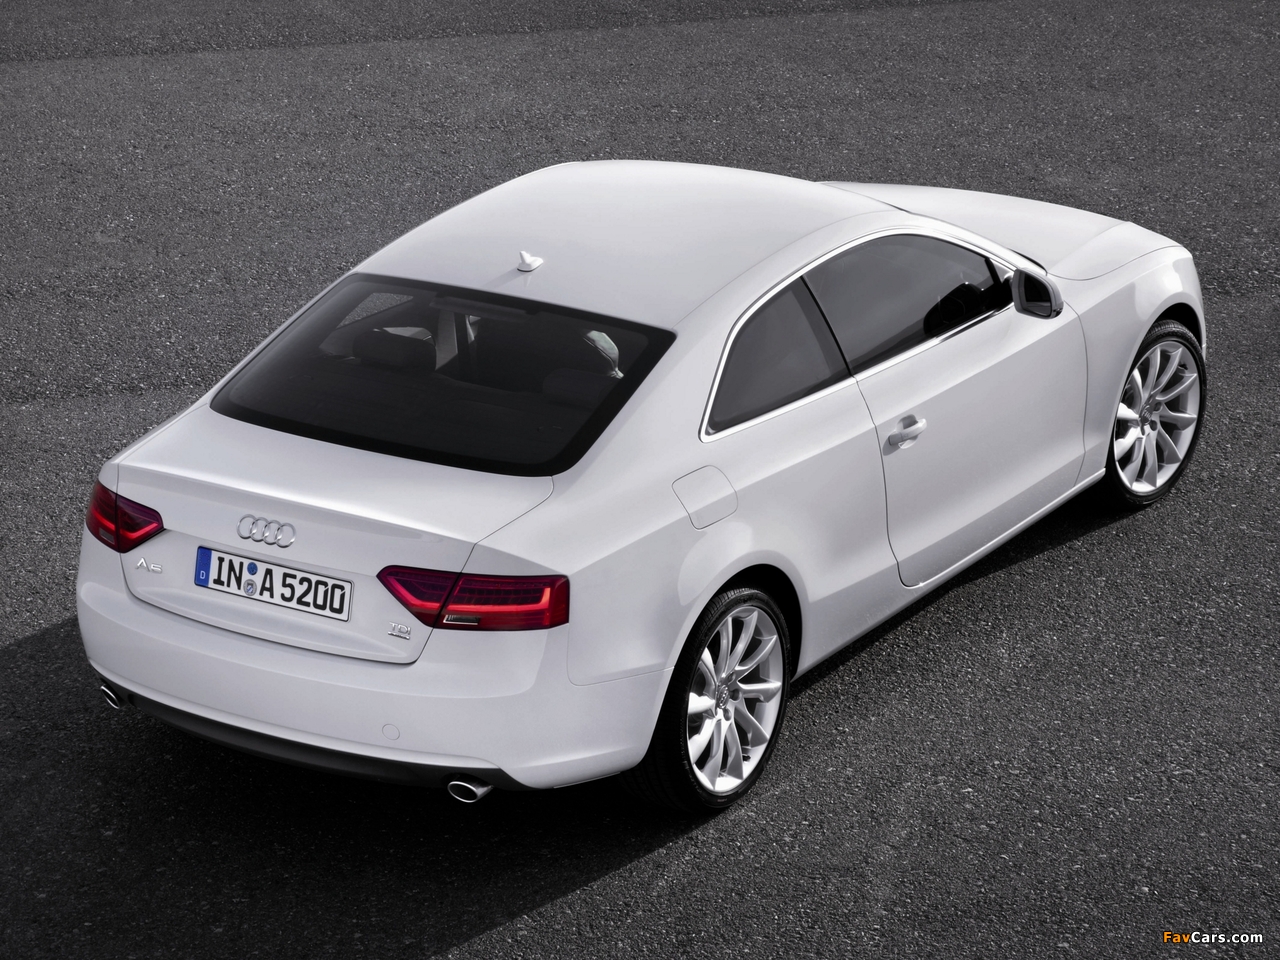 Images of Audi A5 3.0 TDI quattro Coupe 2011 (1280 x 960)